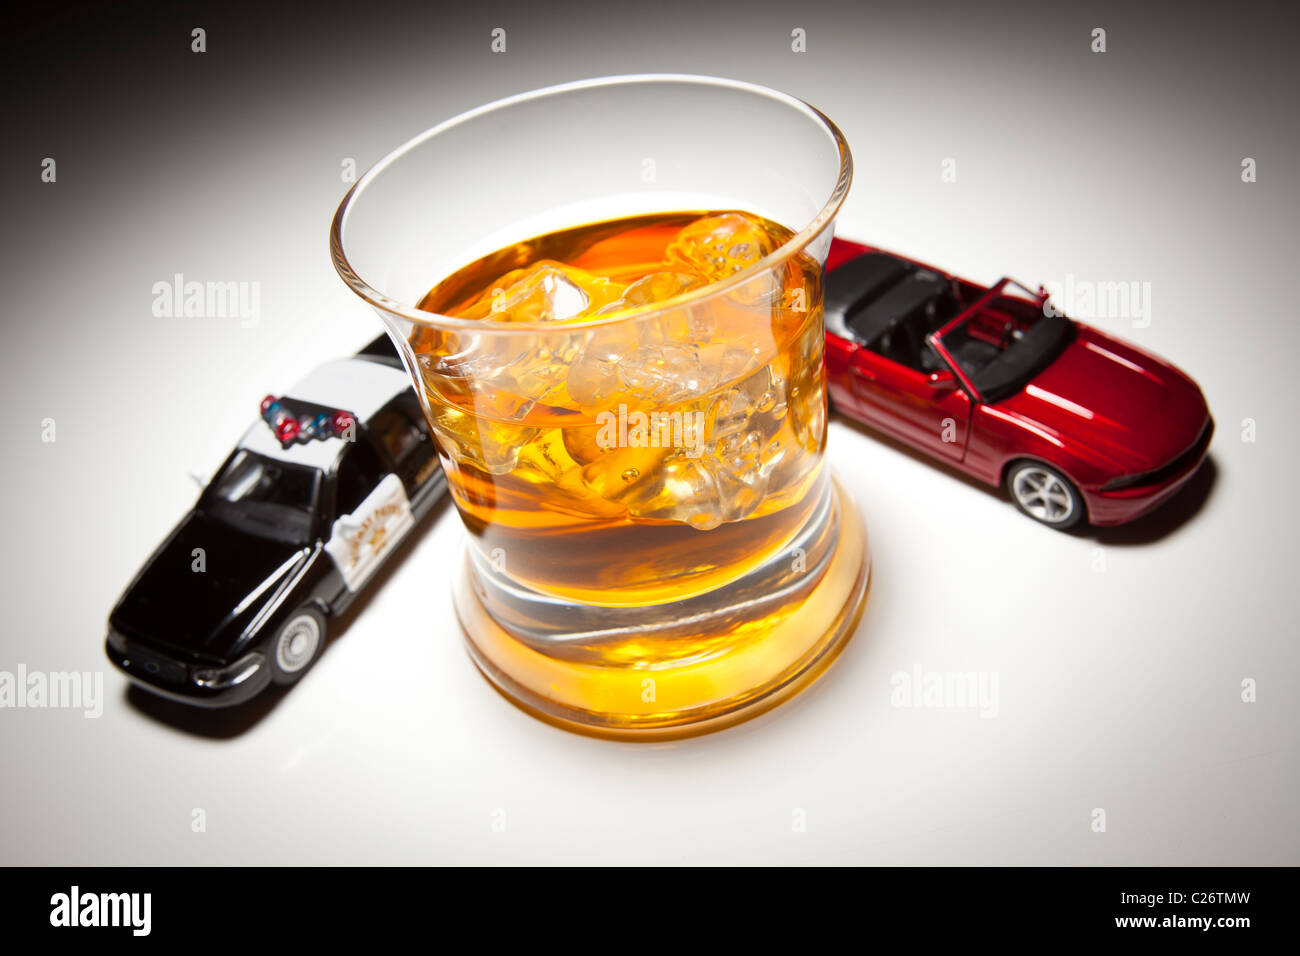 Police and Sports Car Next to Alcoholic Drink Under Spot Light. Stock Photo